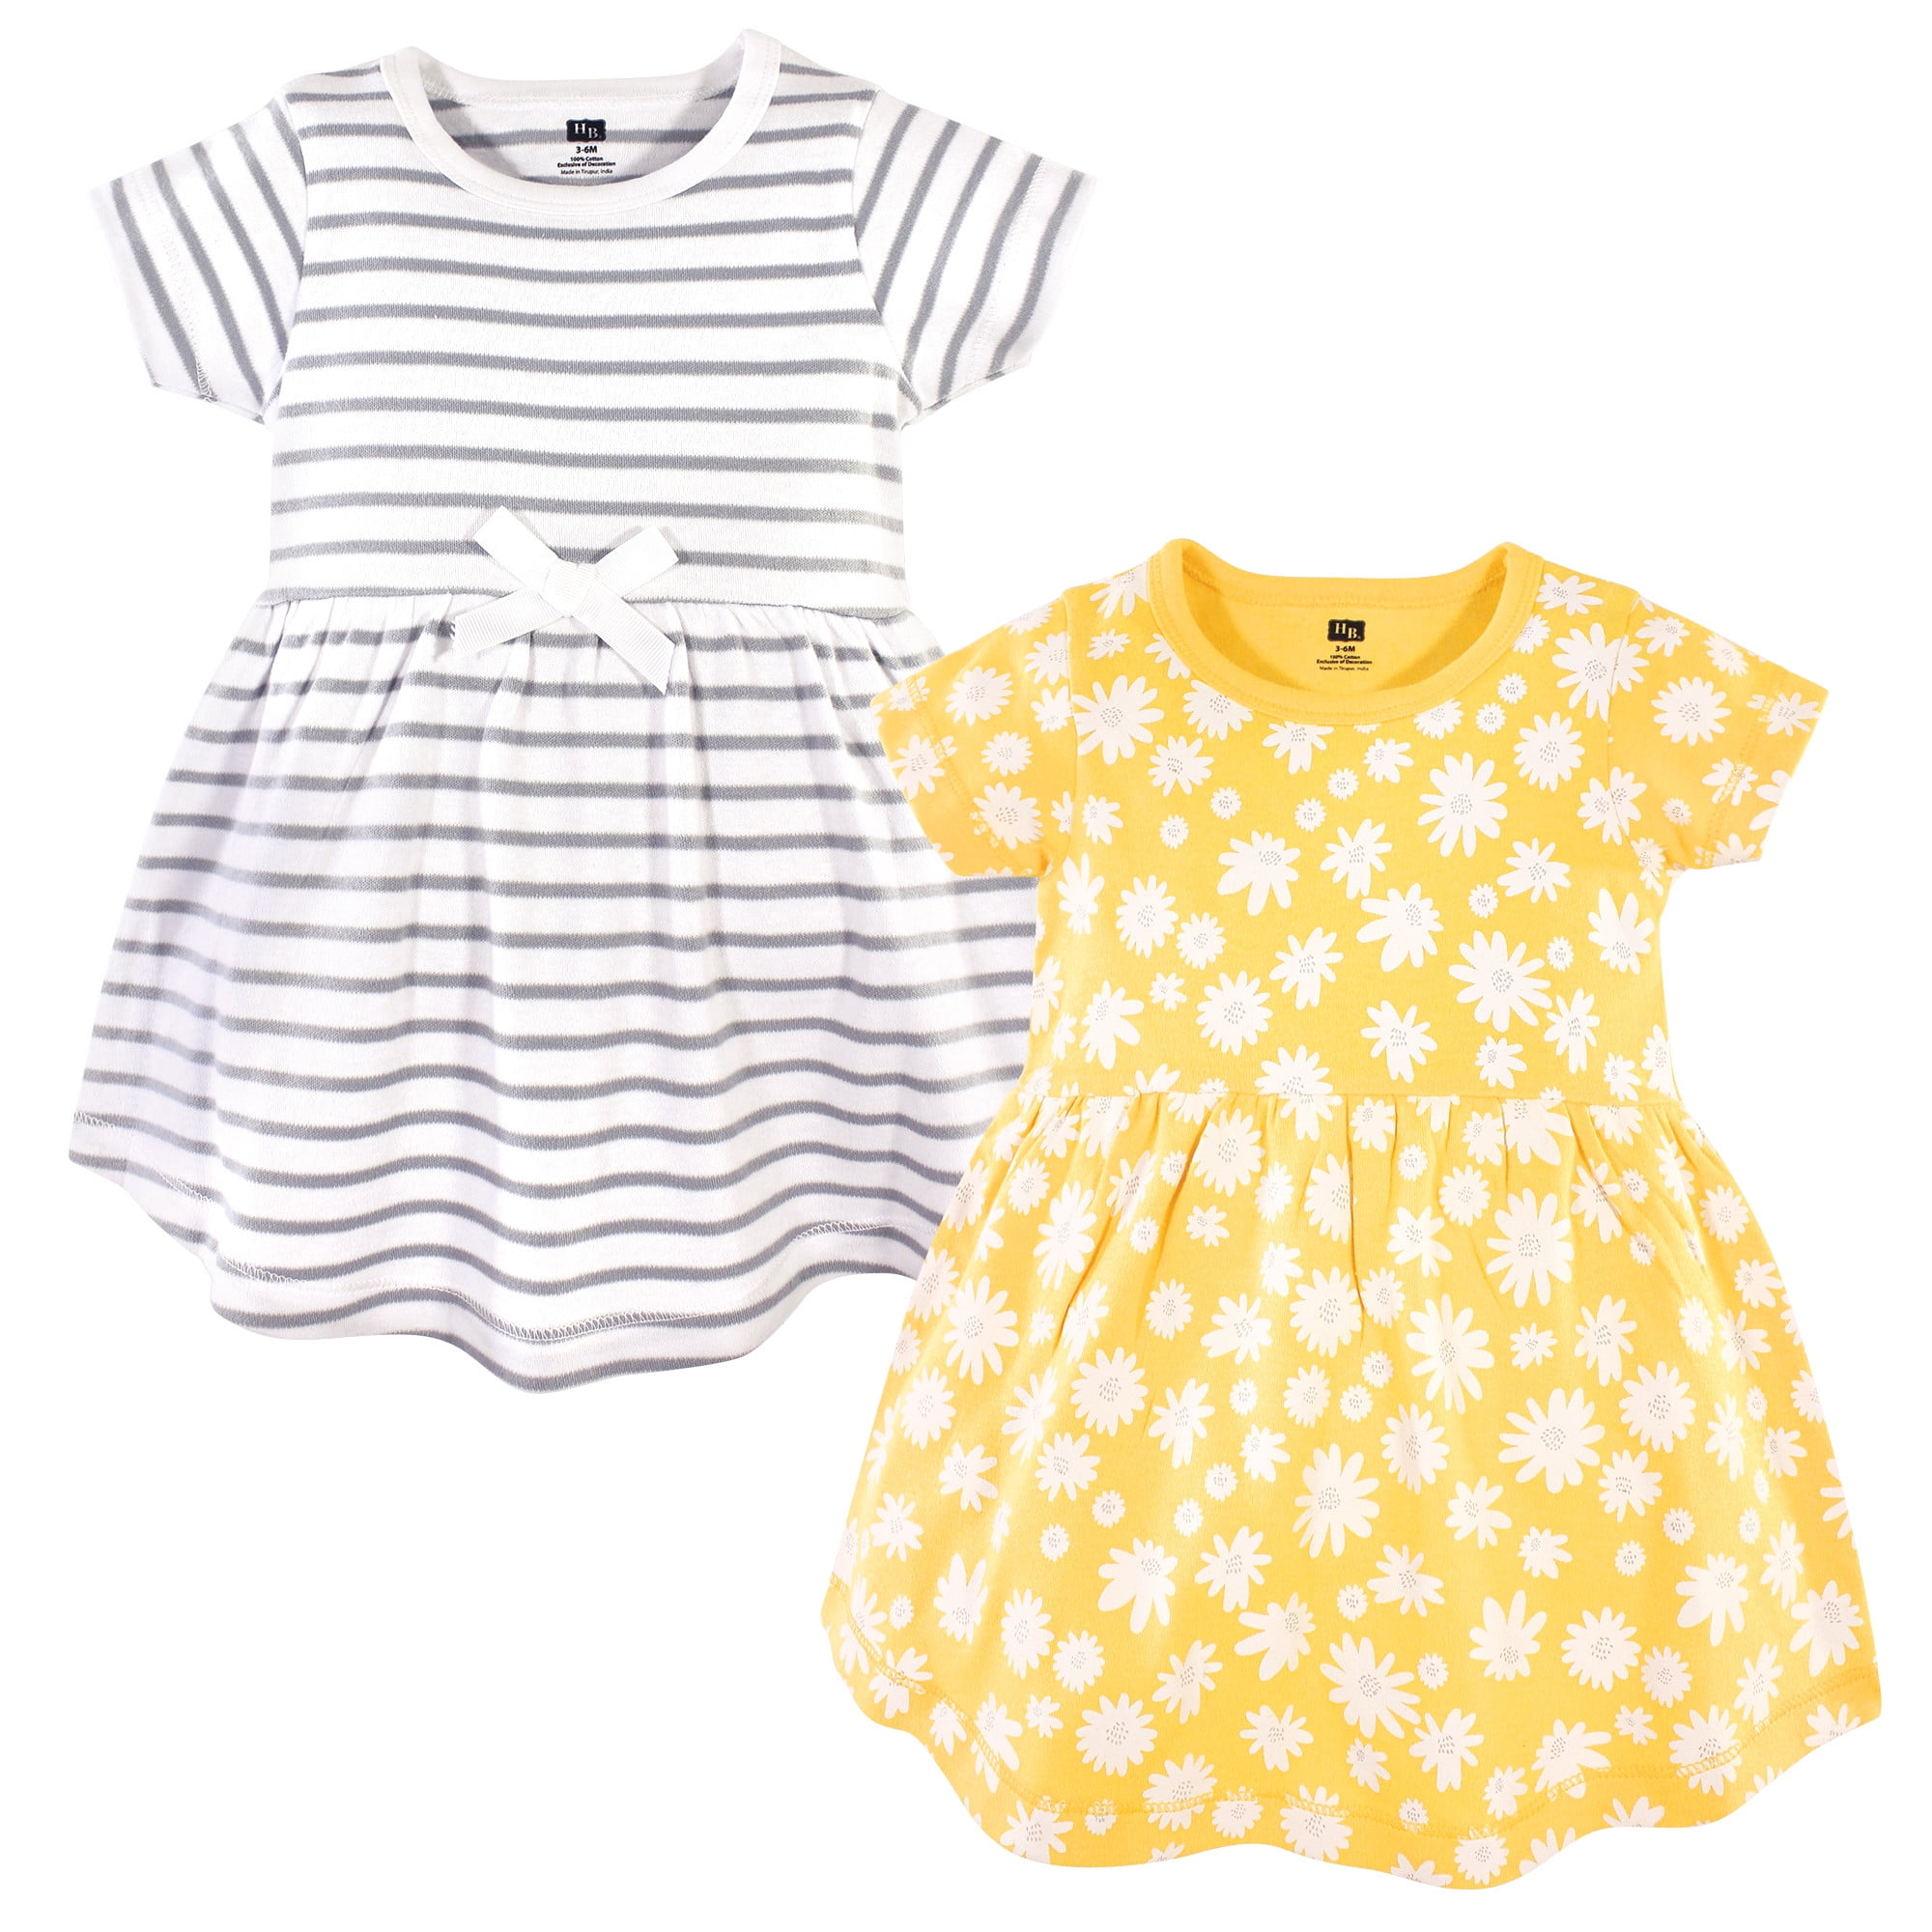 yellow dresses for babies